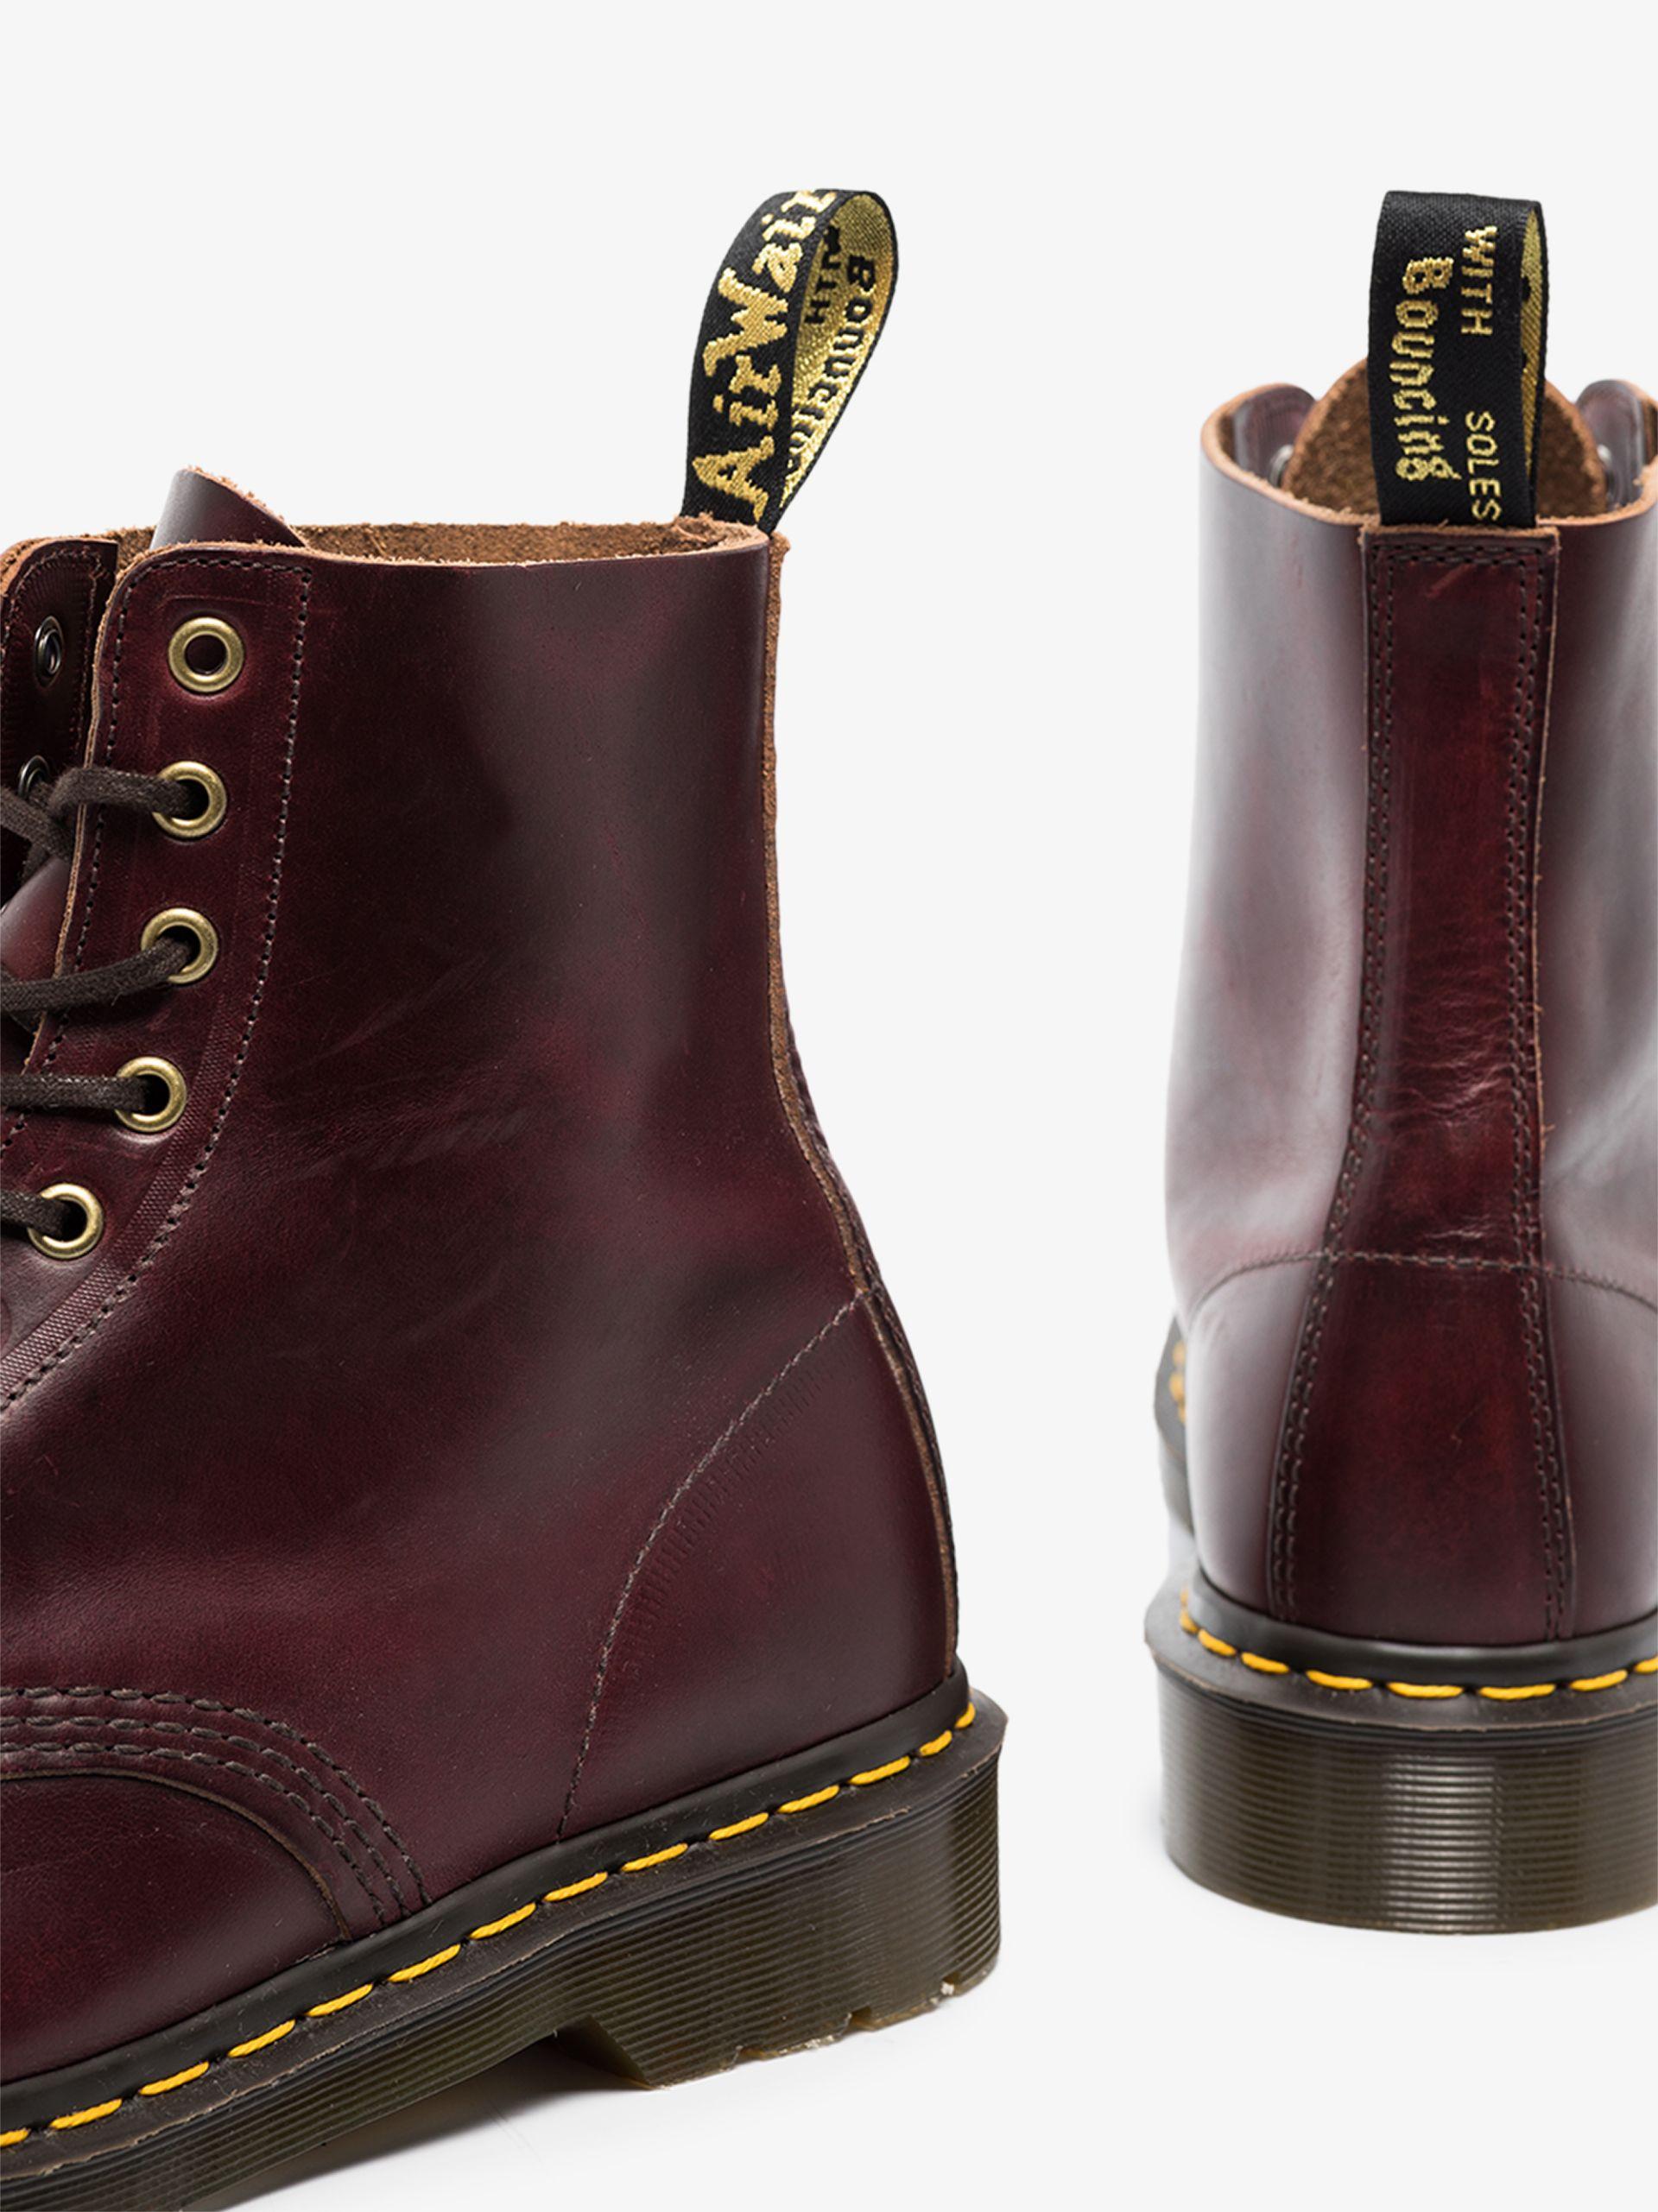 Dr. Martens 1460 Vintage Lace Up Boots in Red for Men | Lyst